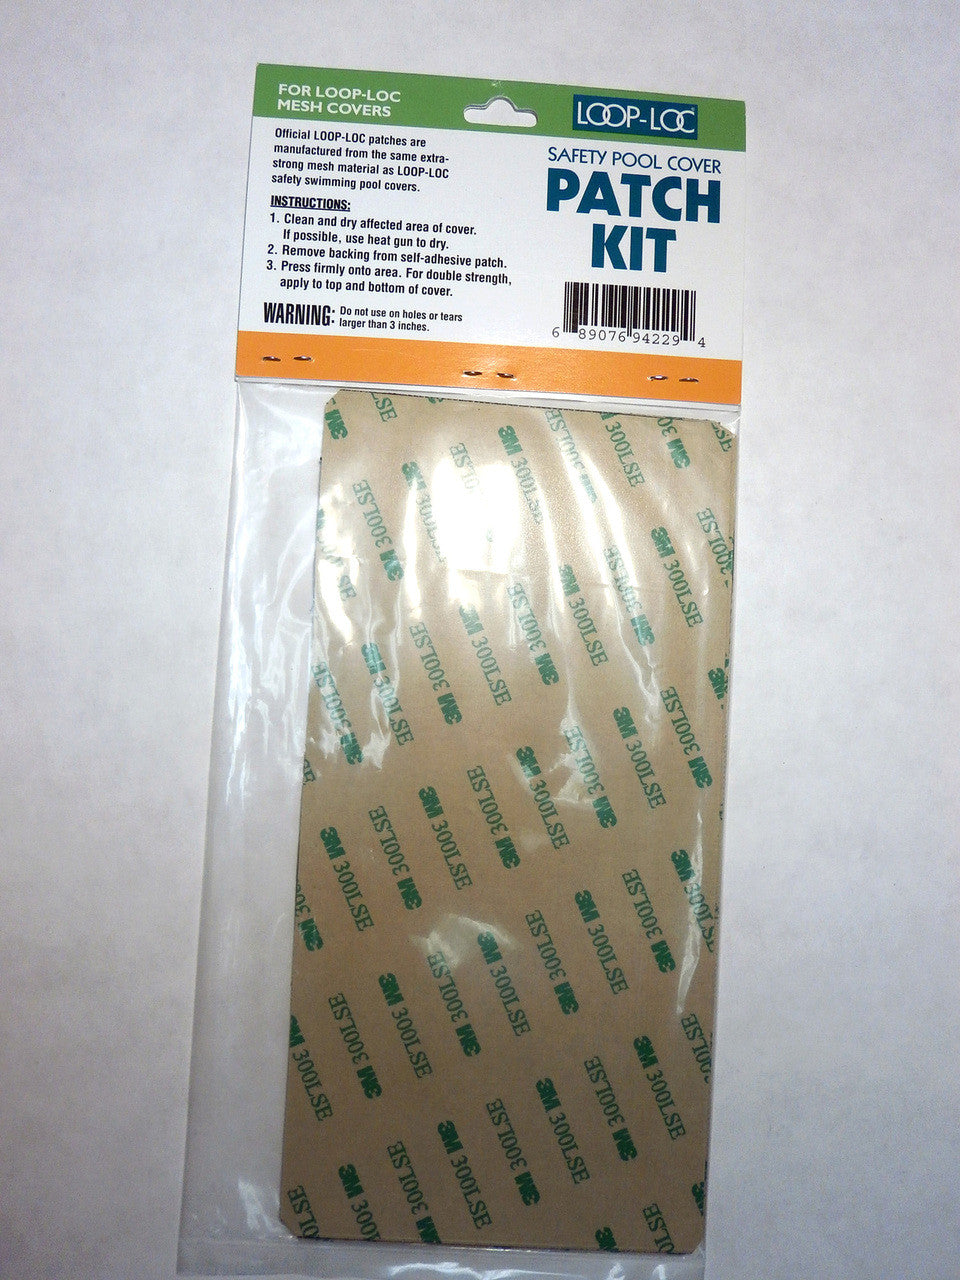 94229 - Package Back